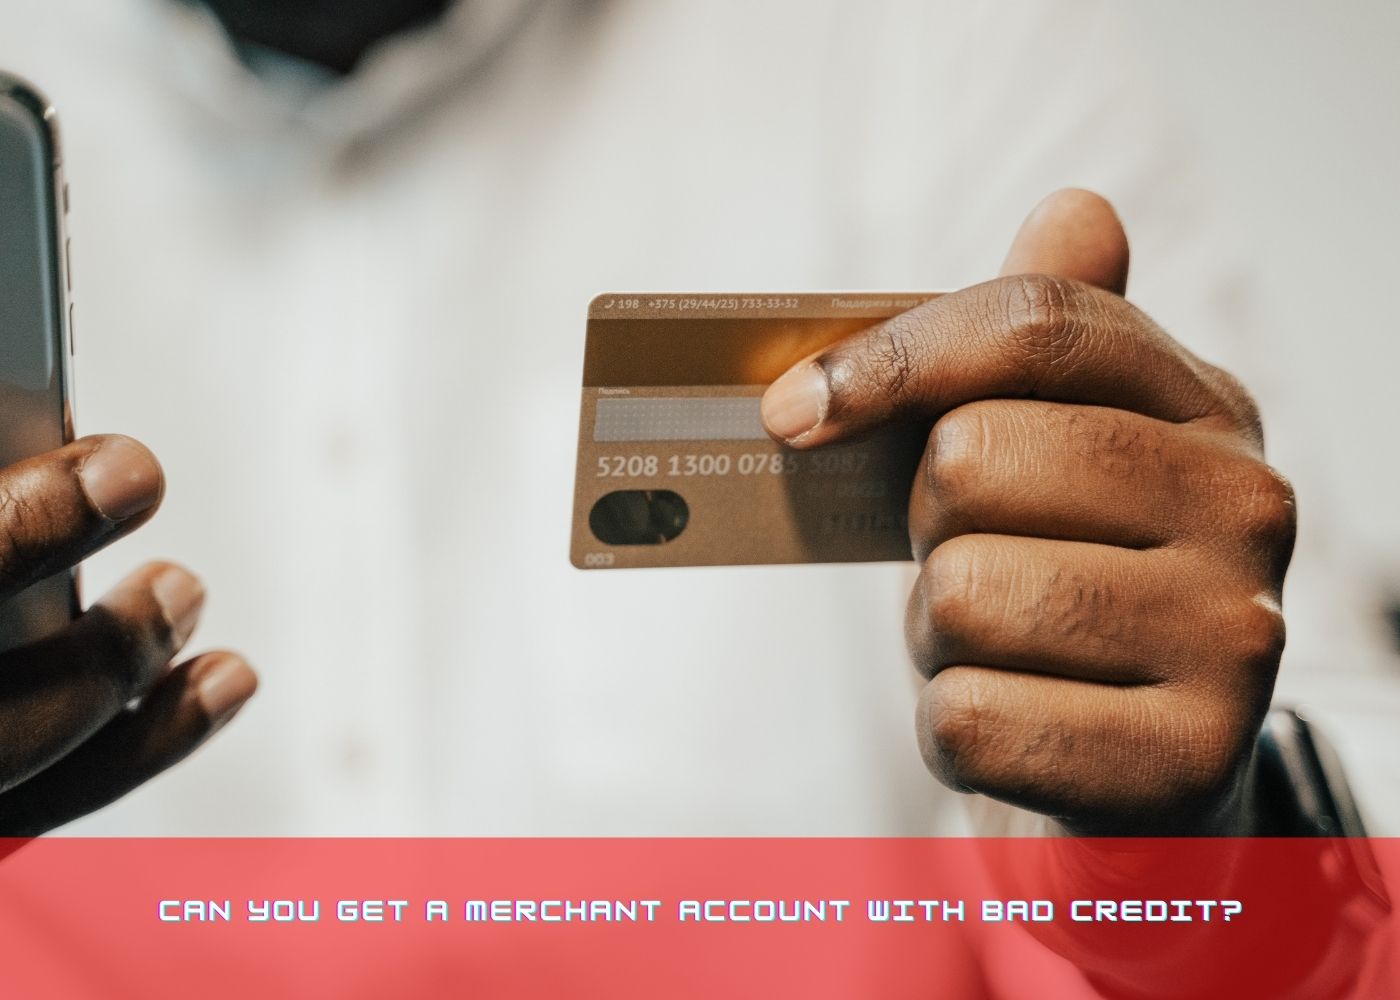 Can you get a merchant account with bad credit?